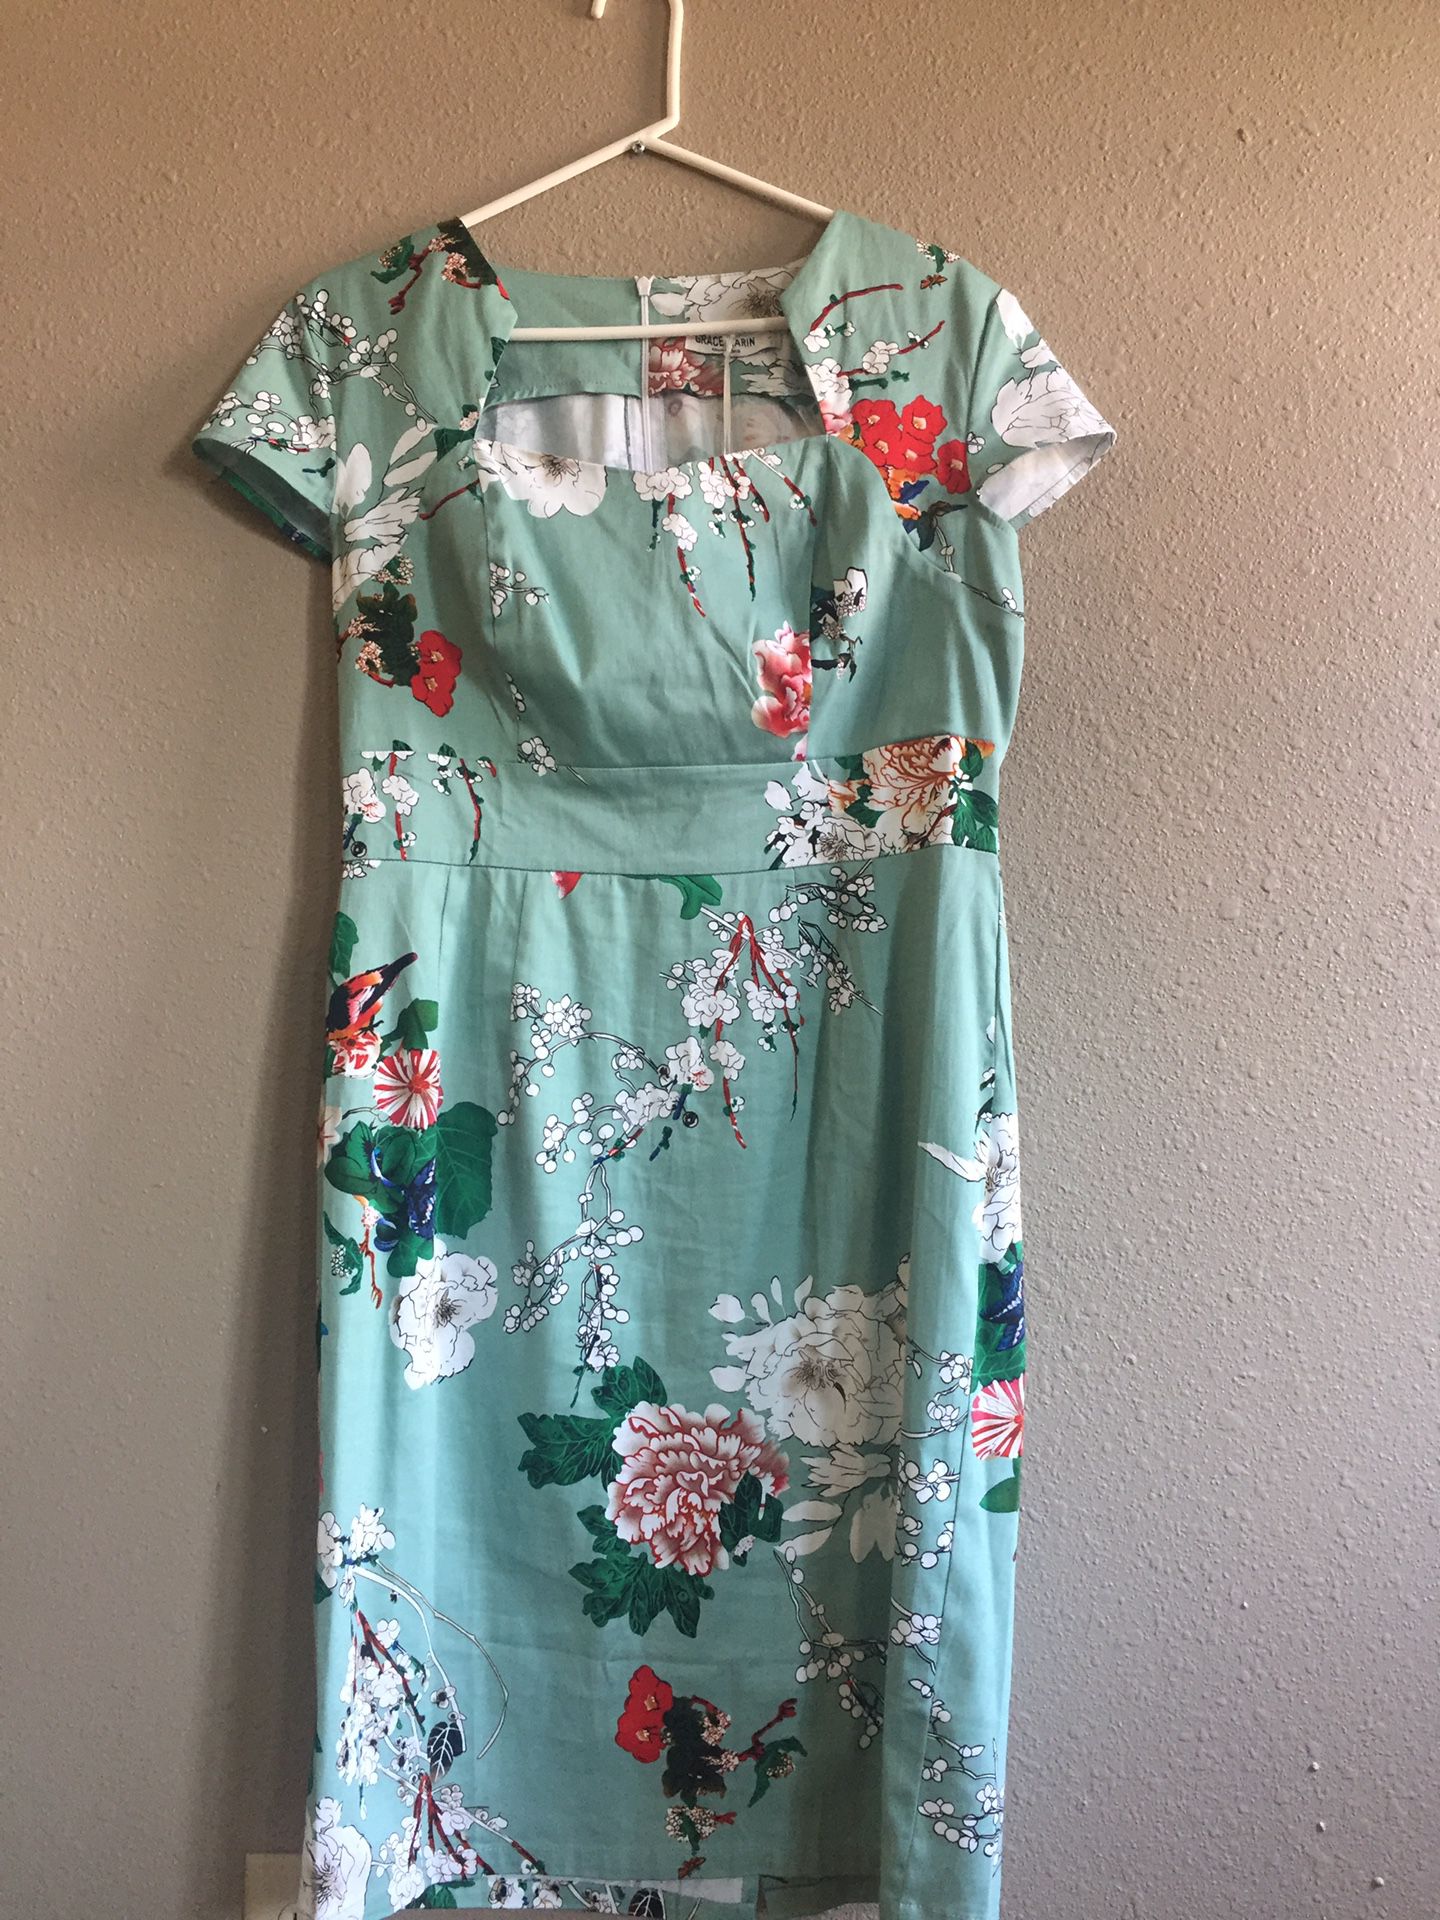 Robins Egg Blue and floral dress. Form fitting. Size 8